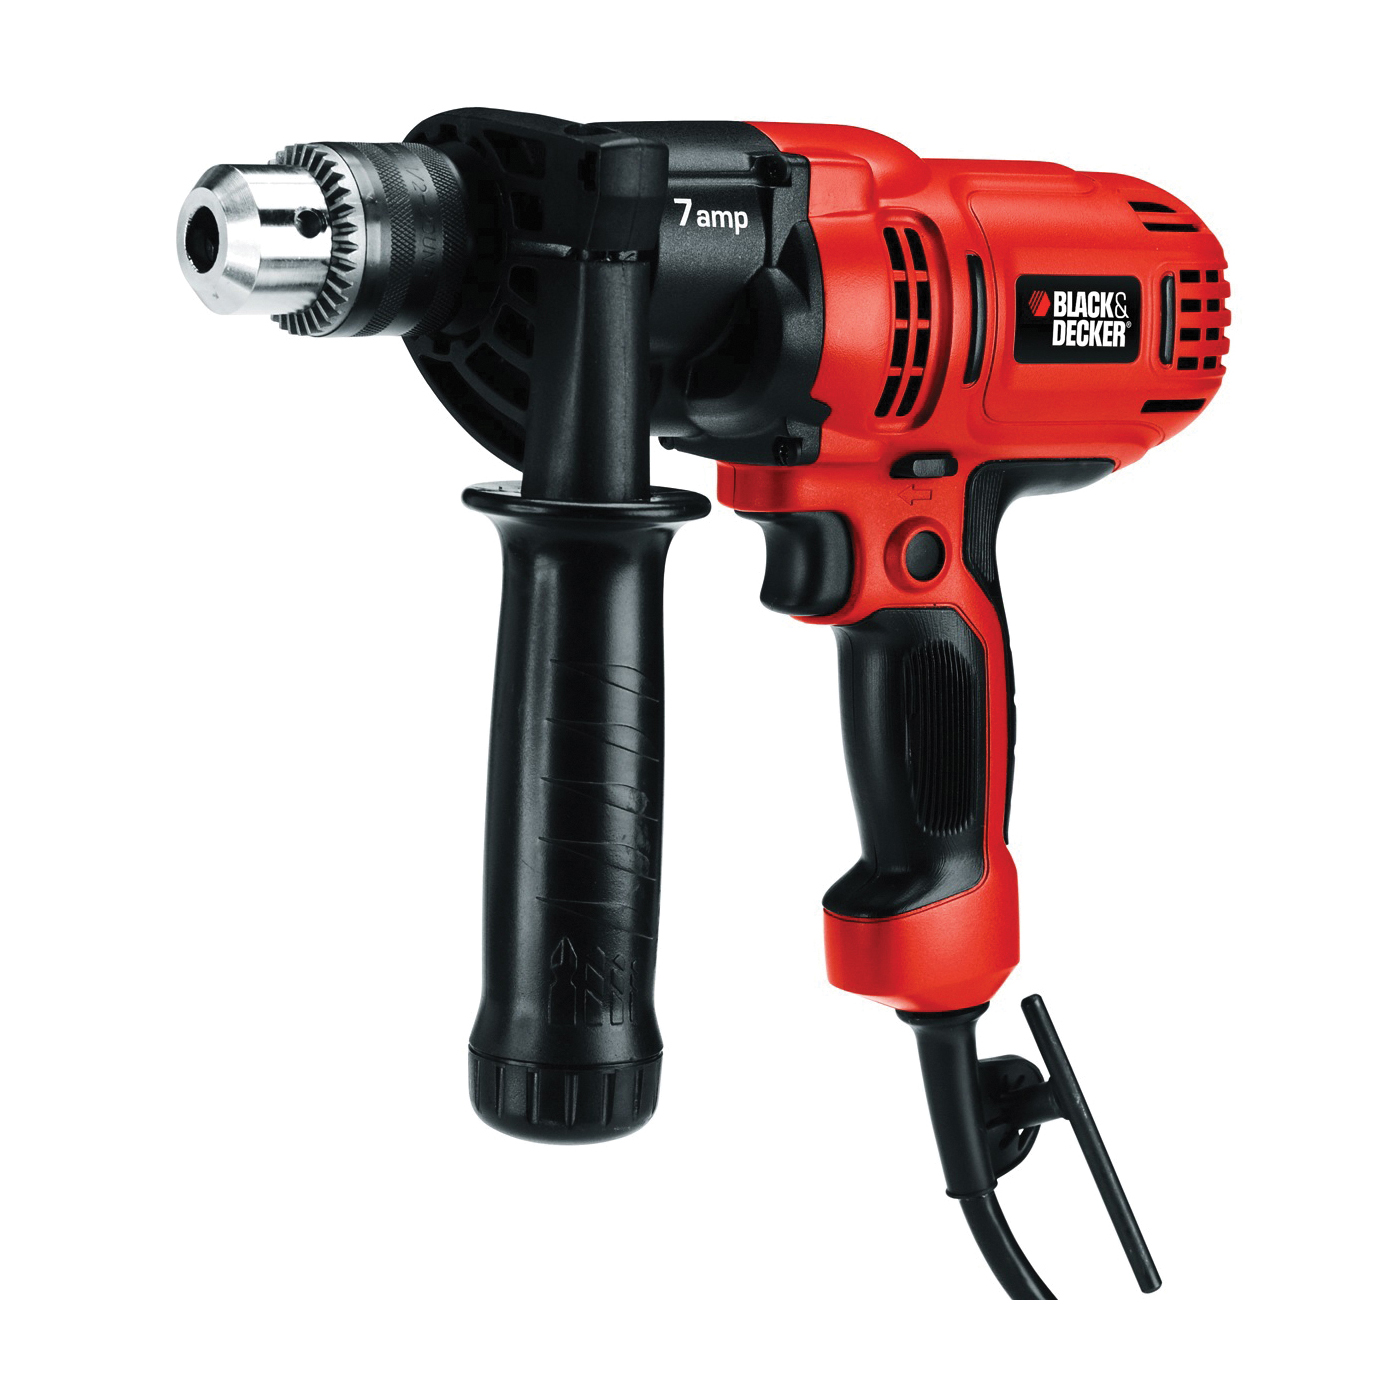 DR560 Drill/Driver, 7 A, 1/2 in Chuck, Keyed Chuck, Includes: (1) Chuck Key and Holder, (1) Side Handle